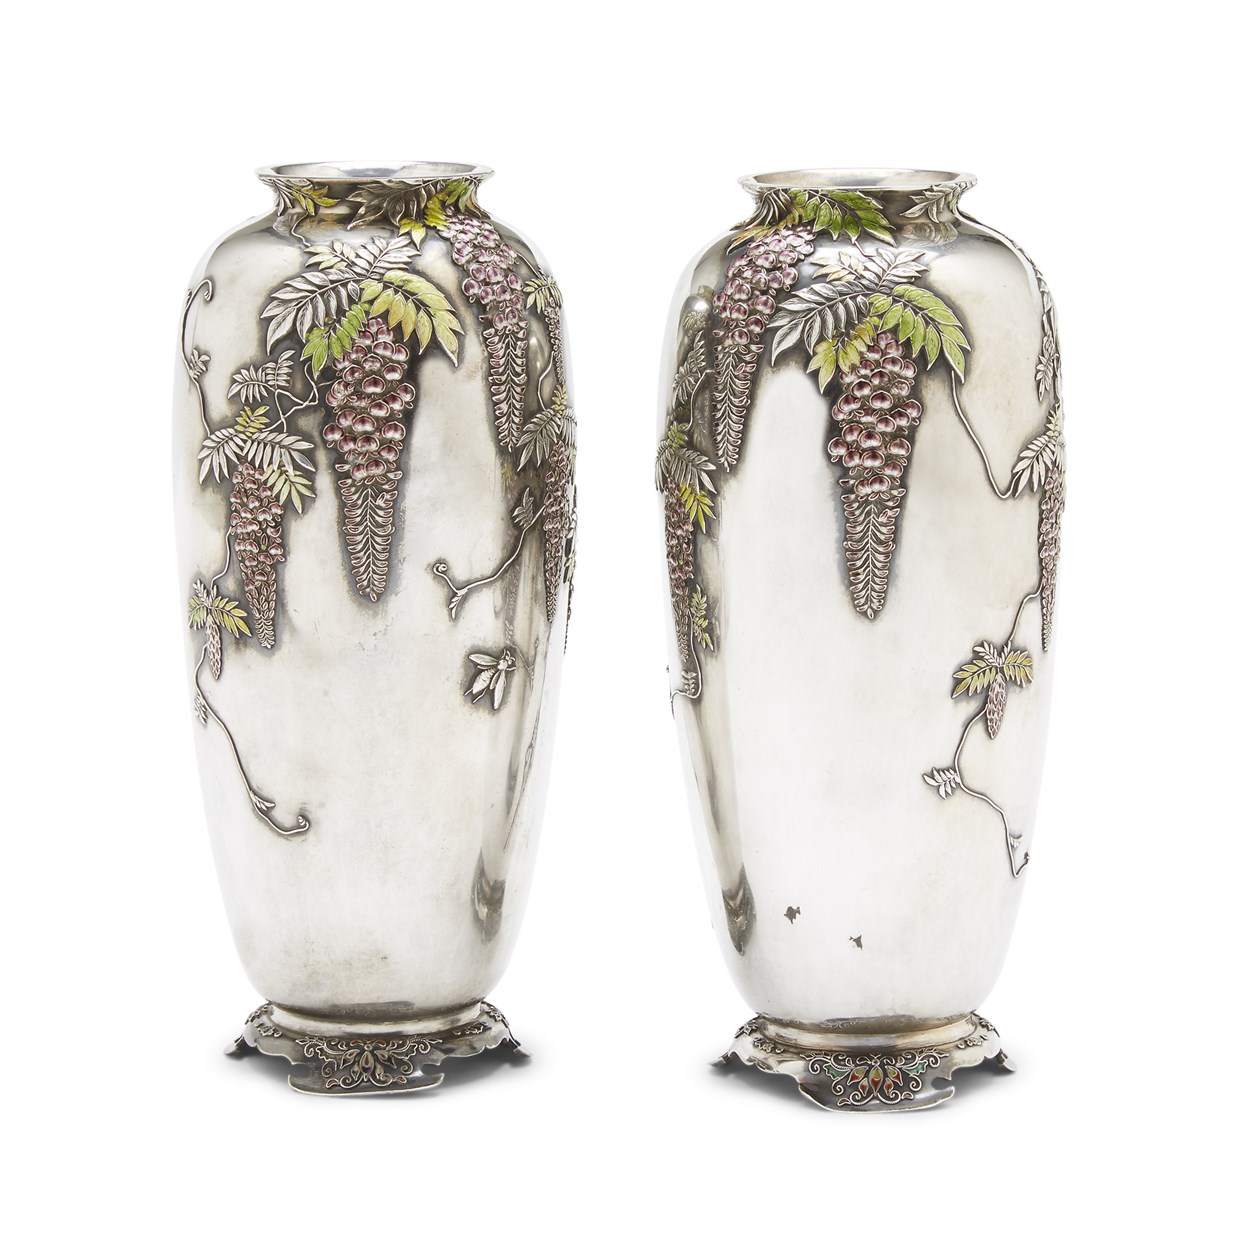 Lot 78 - A pair of finely-decorated Japanese enameled silver "Wisteria" vases, Sanju Saku